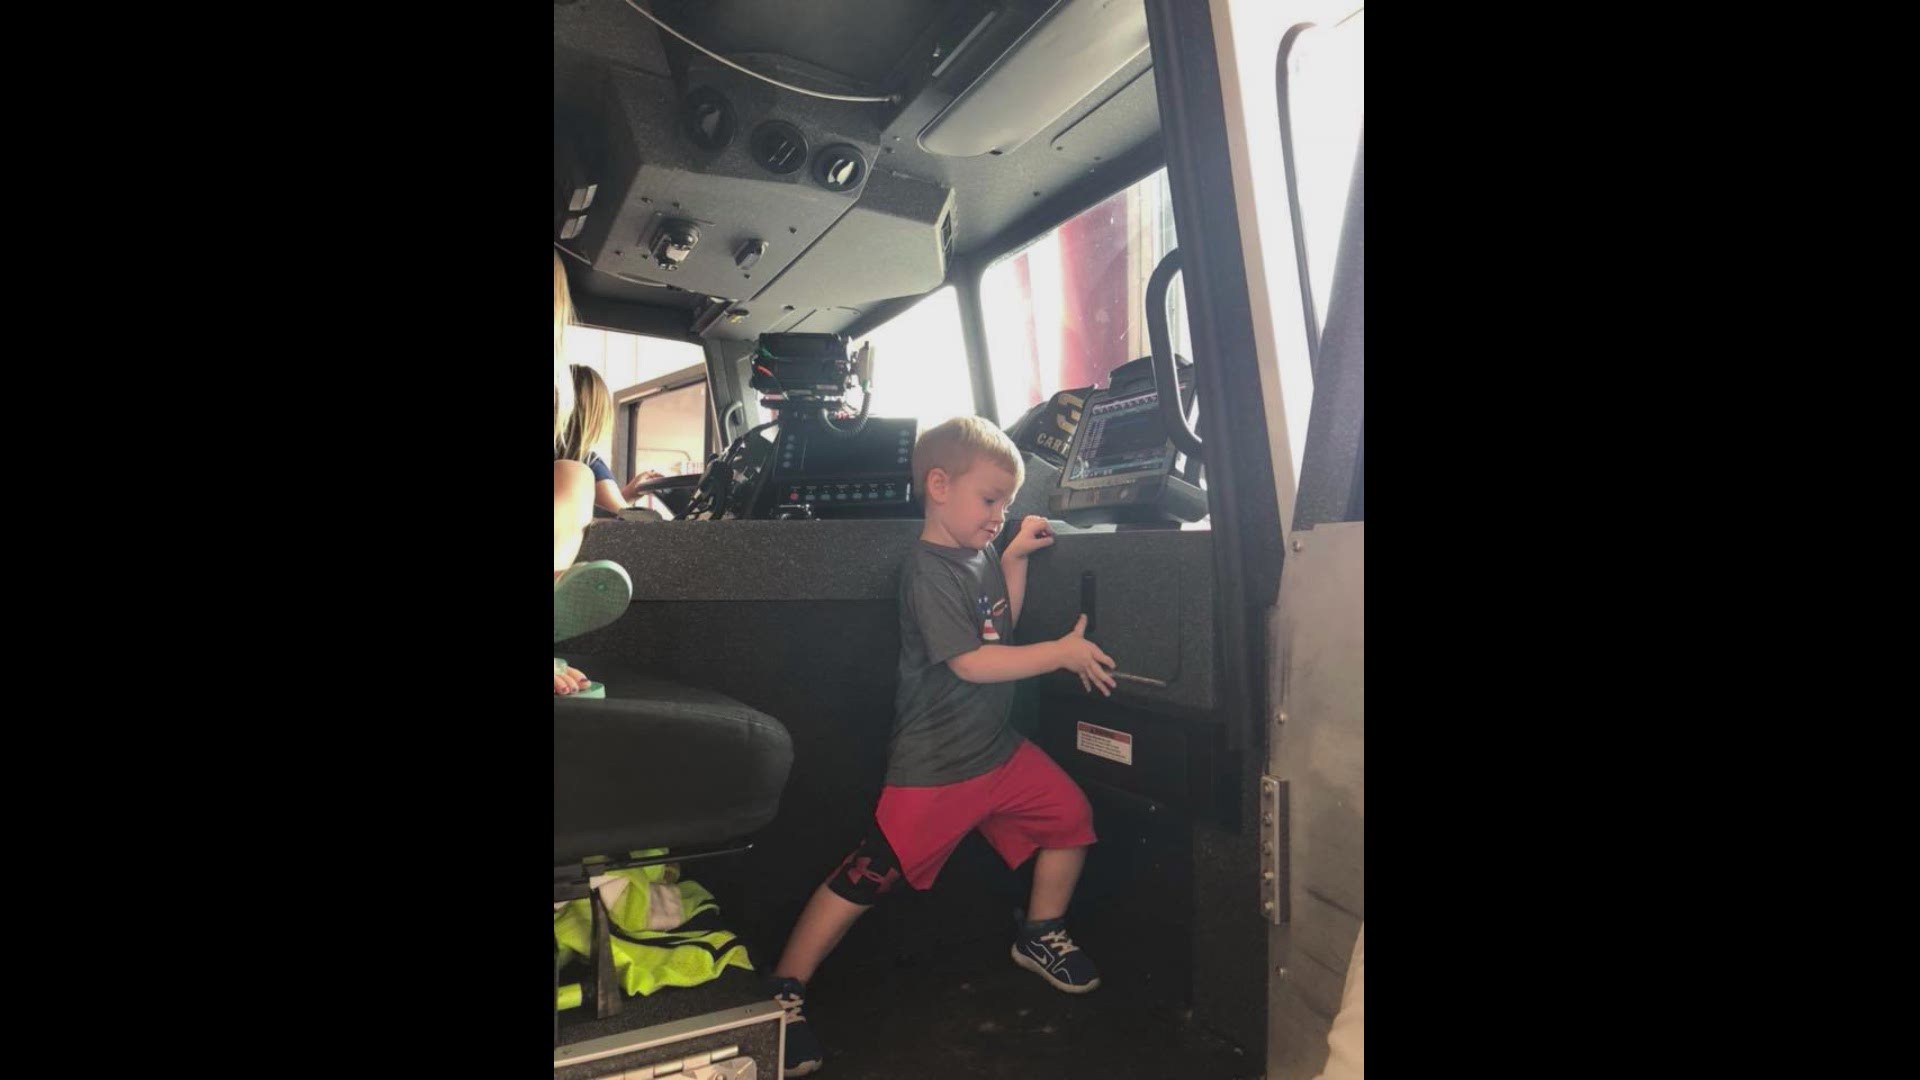 Fire department throws birthday party for NC boy after all but one of his guests cancel